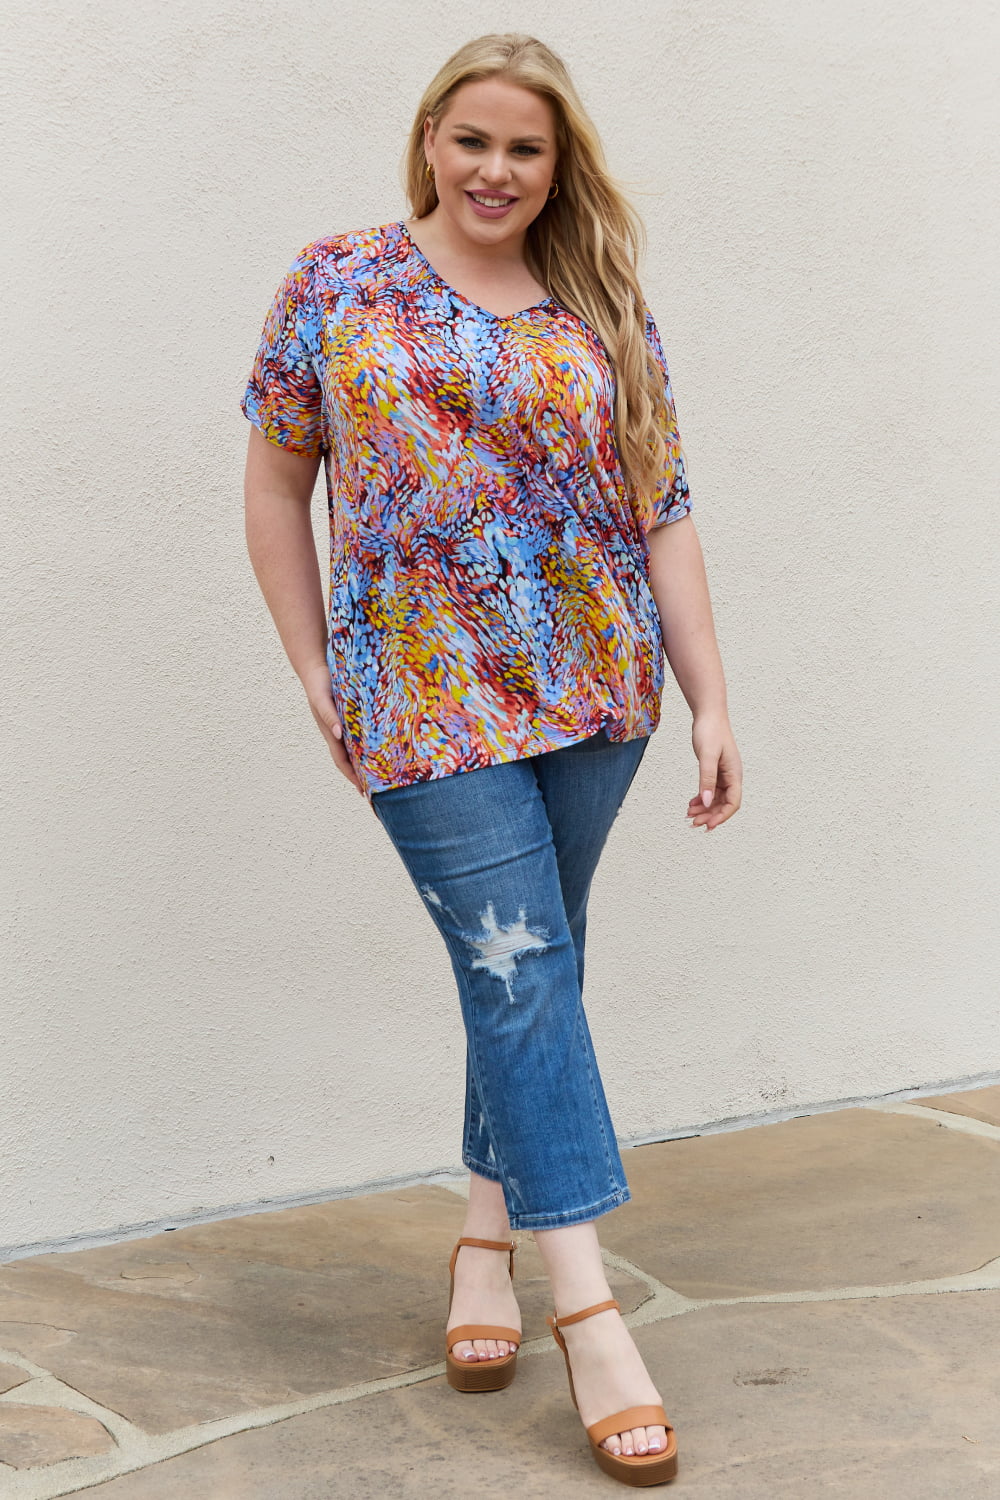 Be Stage Full Size Printed Dolman Flowy Top-Short Sleeve Tops-Inspired by Justeen-Women's Clothing Boutique in Chicago, Illinois